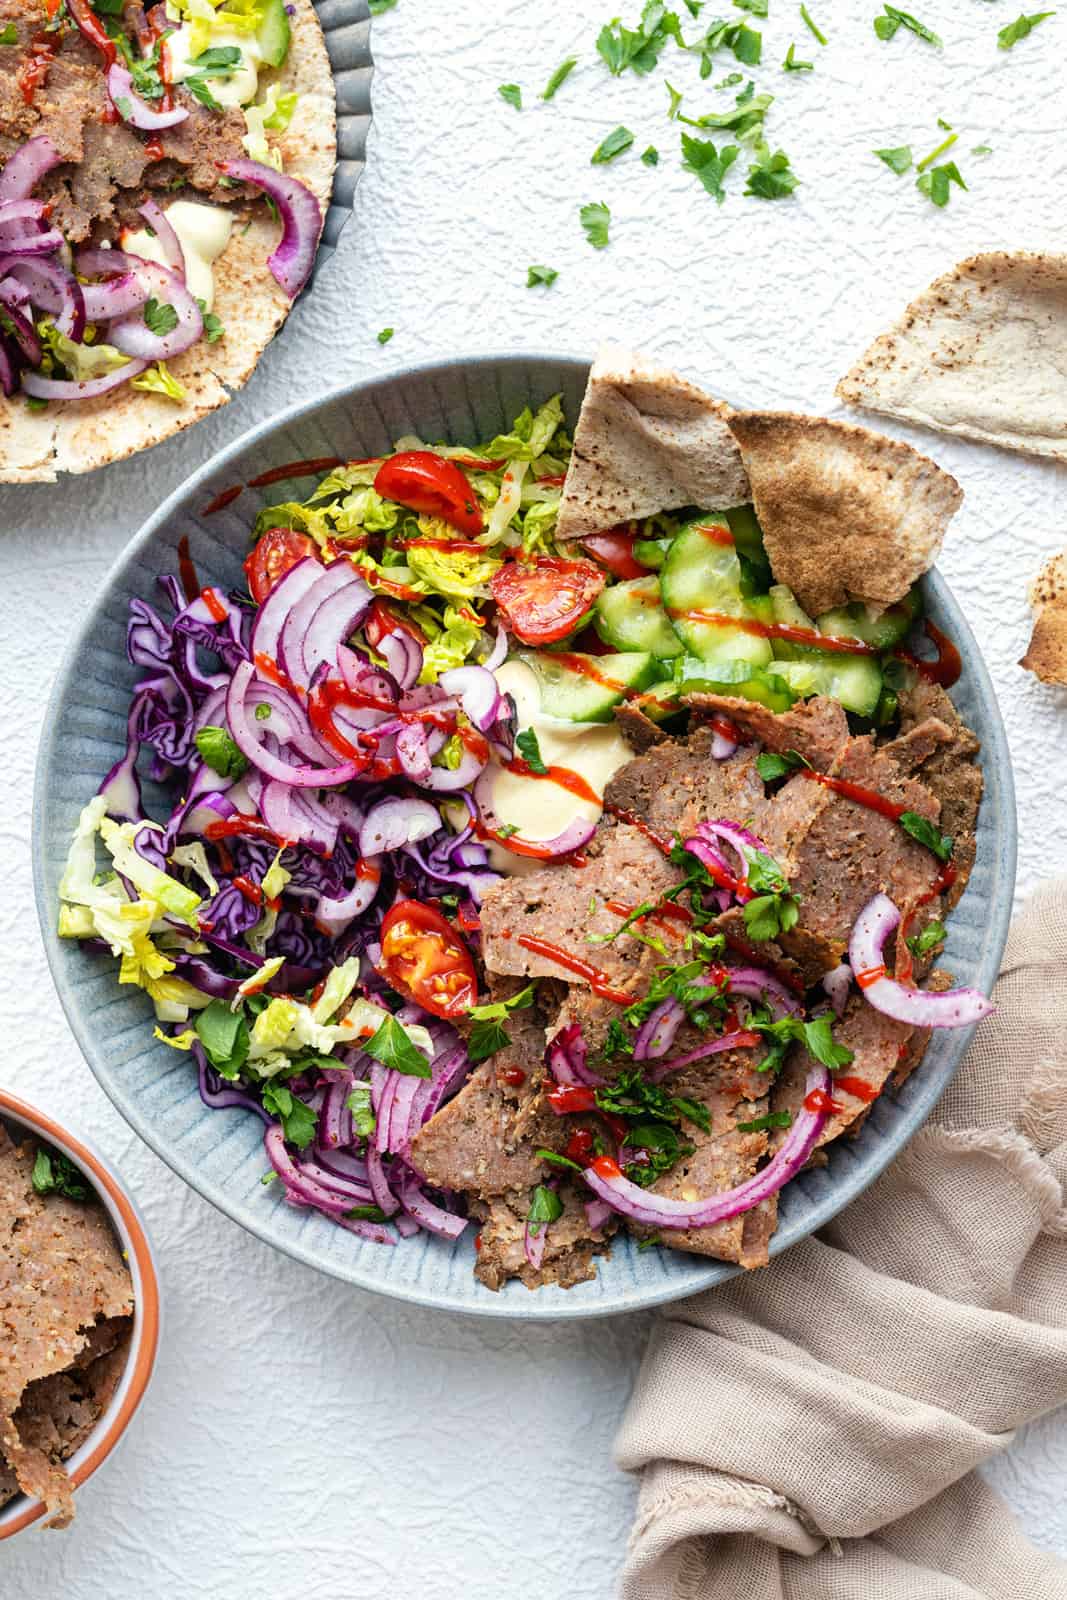 Slow Cooker Doner Salad Bowl with Cucumber, Tomato, Sliced Onions and Pita Bread